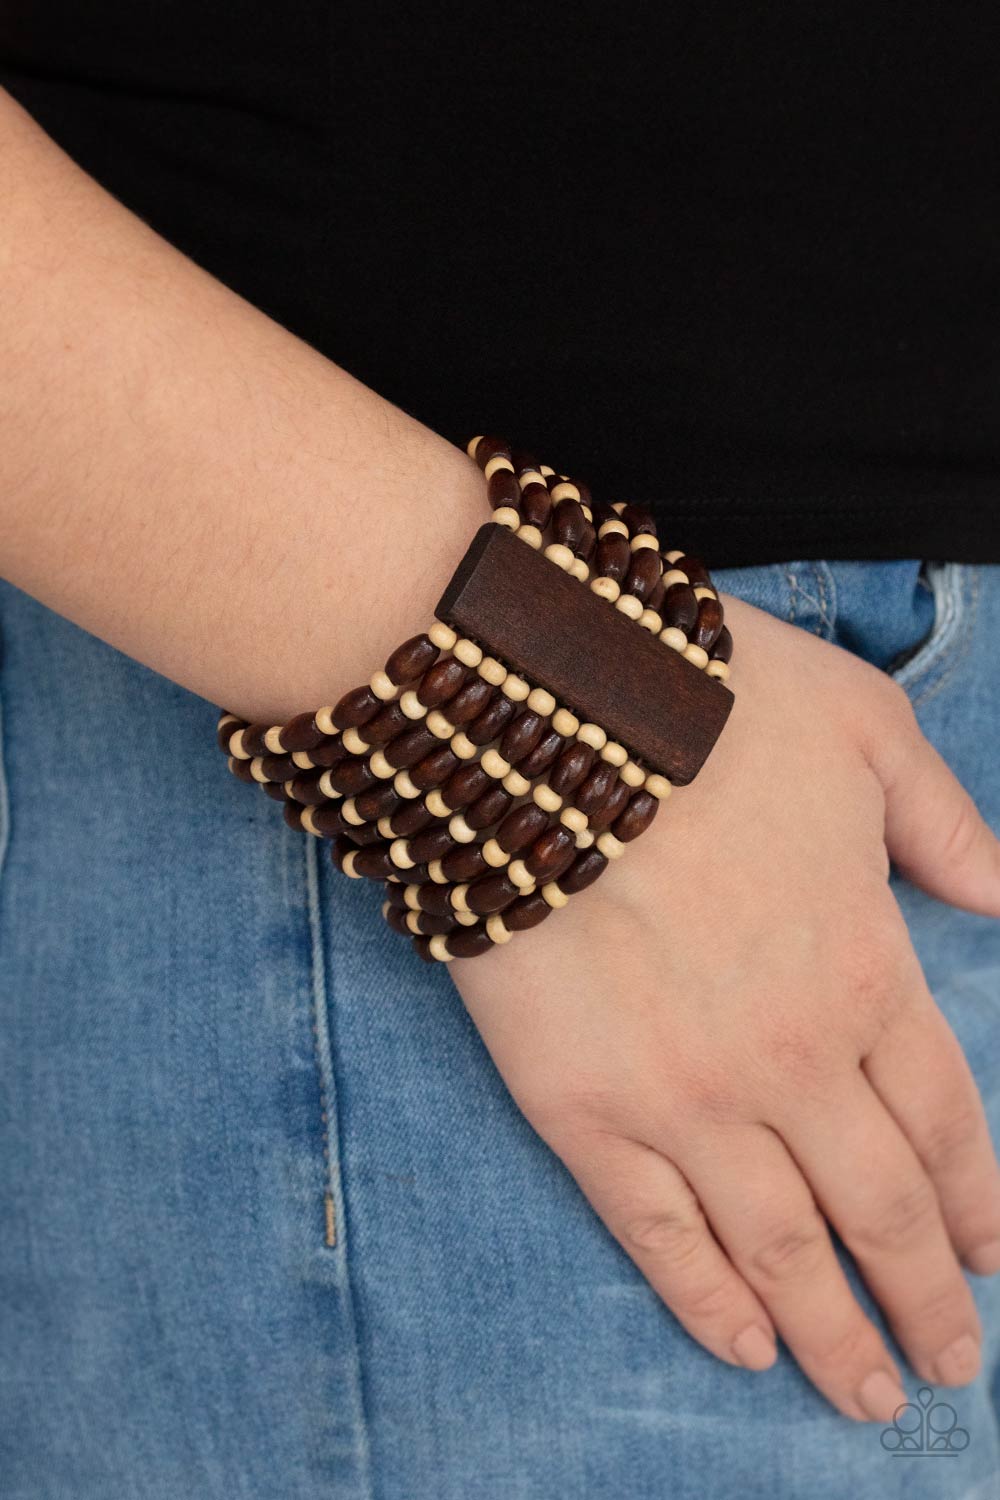 Cayman Carnival - Brown Wood Stretch Bracelets held together with rectangular wooden frames, an earthy collection of white wooden beads and brown oval wooden beads are threaded along stretchy bands around the wrist for a bold beach inspired fashion.  Sold as one individual bracelet.